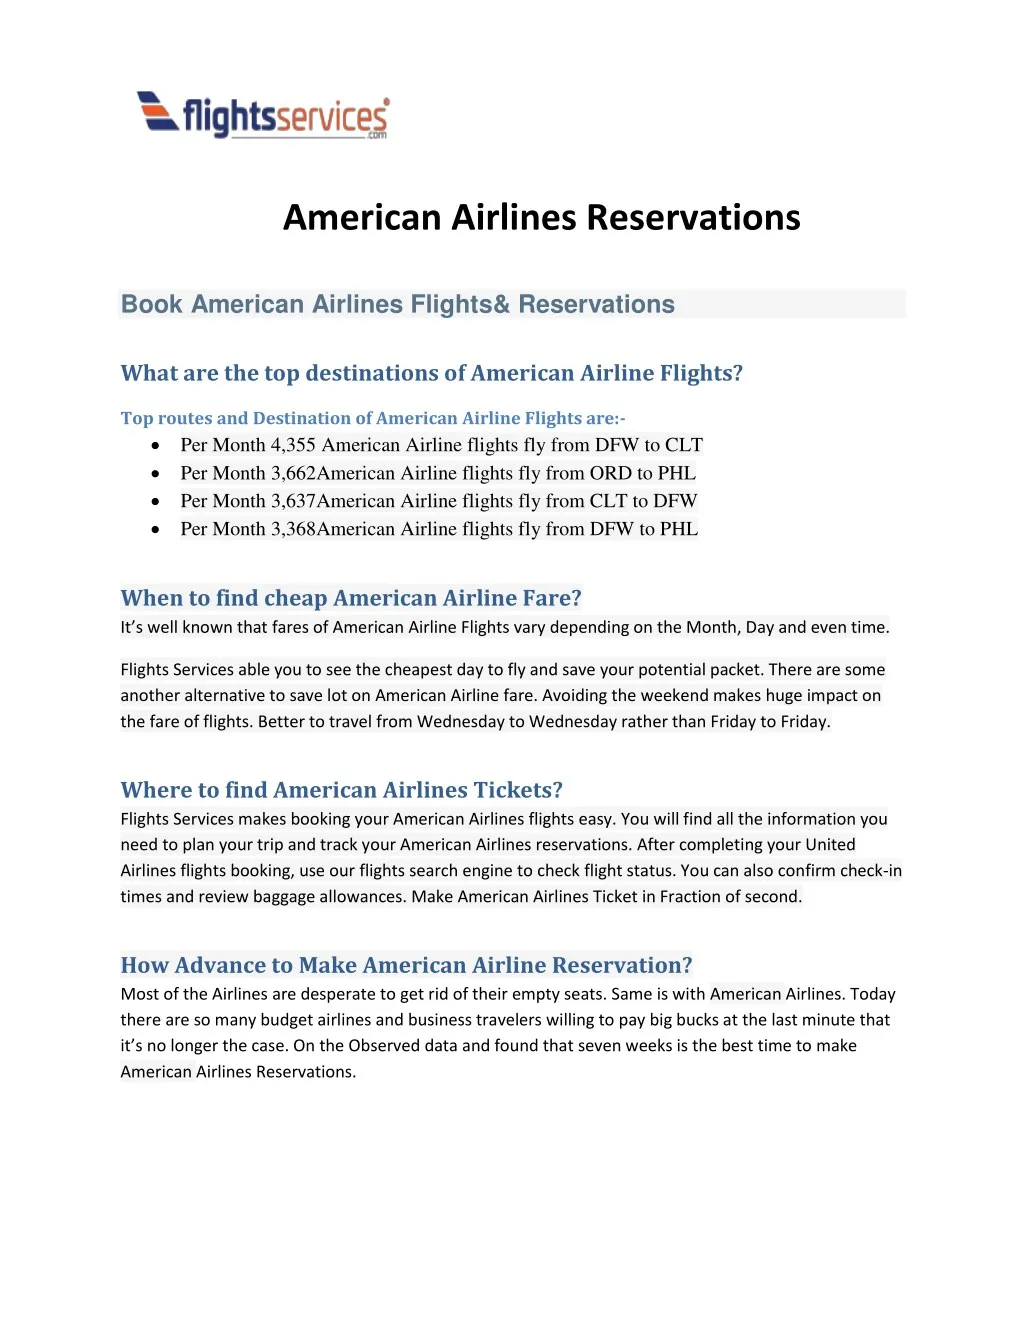 american airlines reservations book american